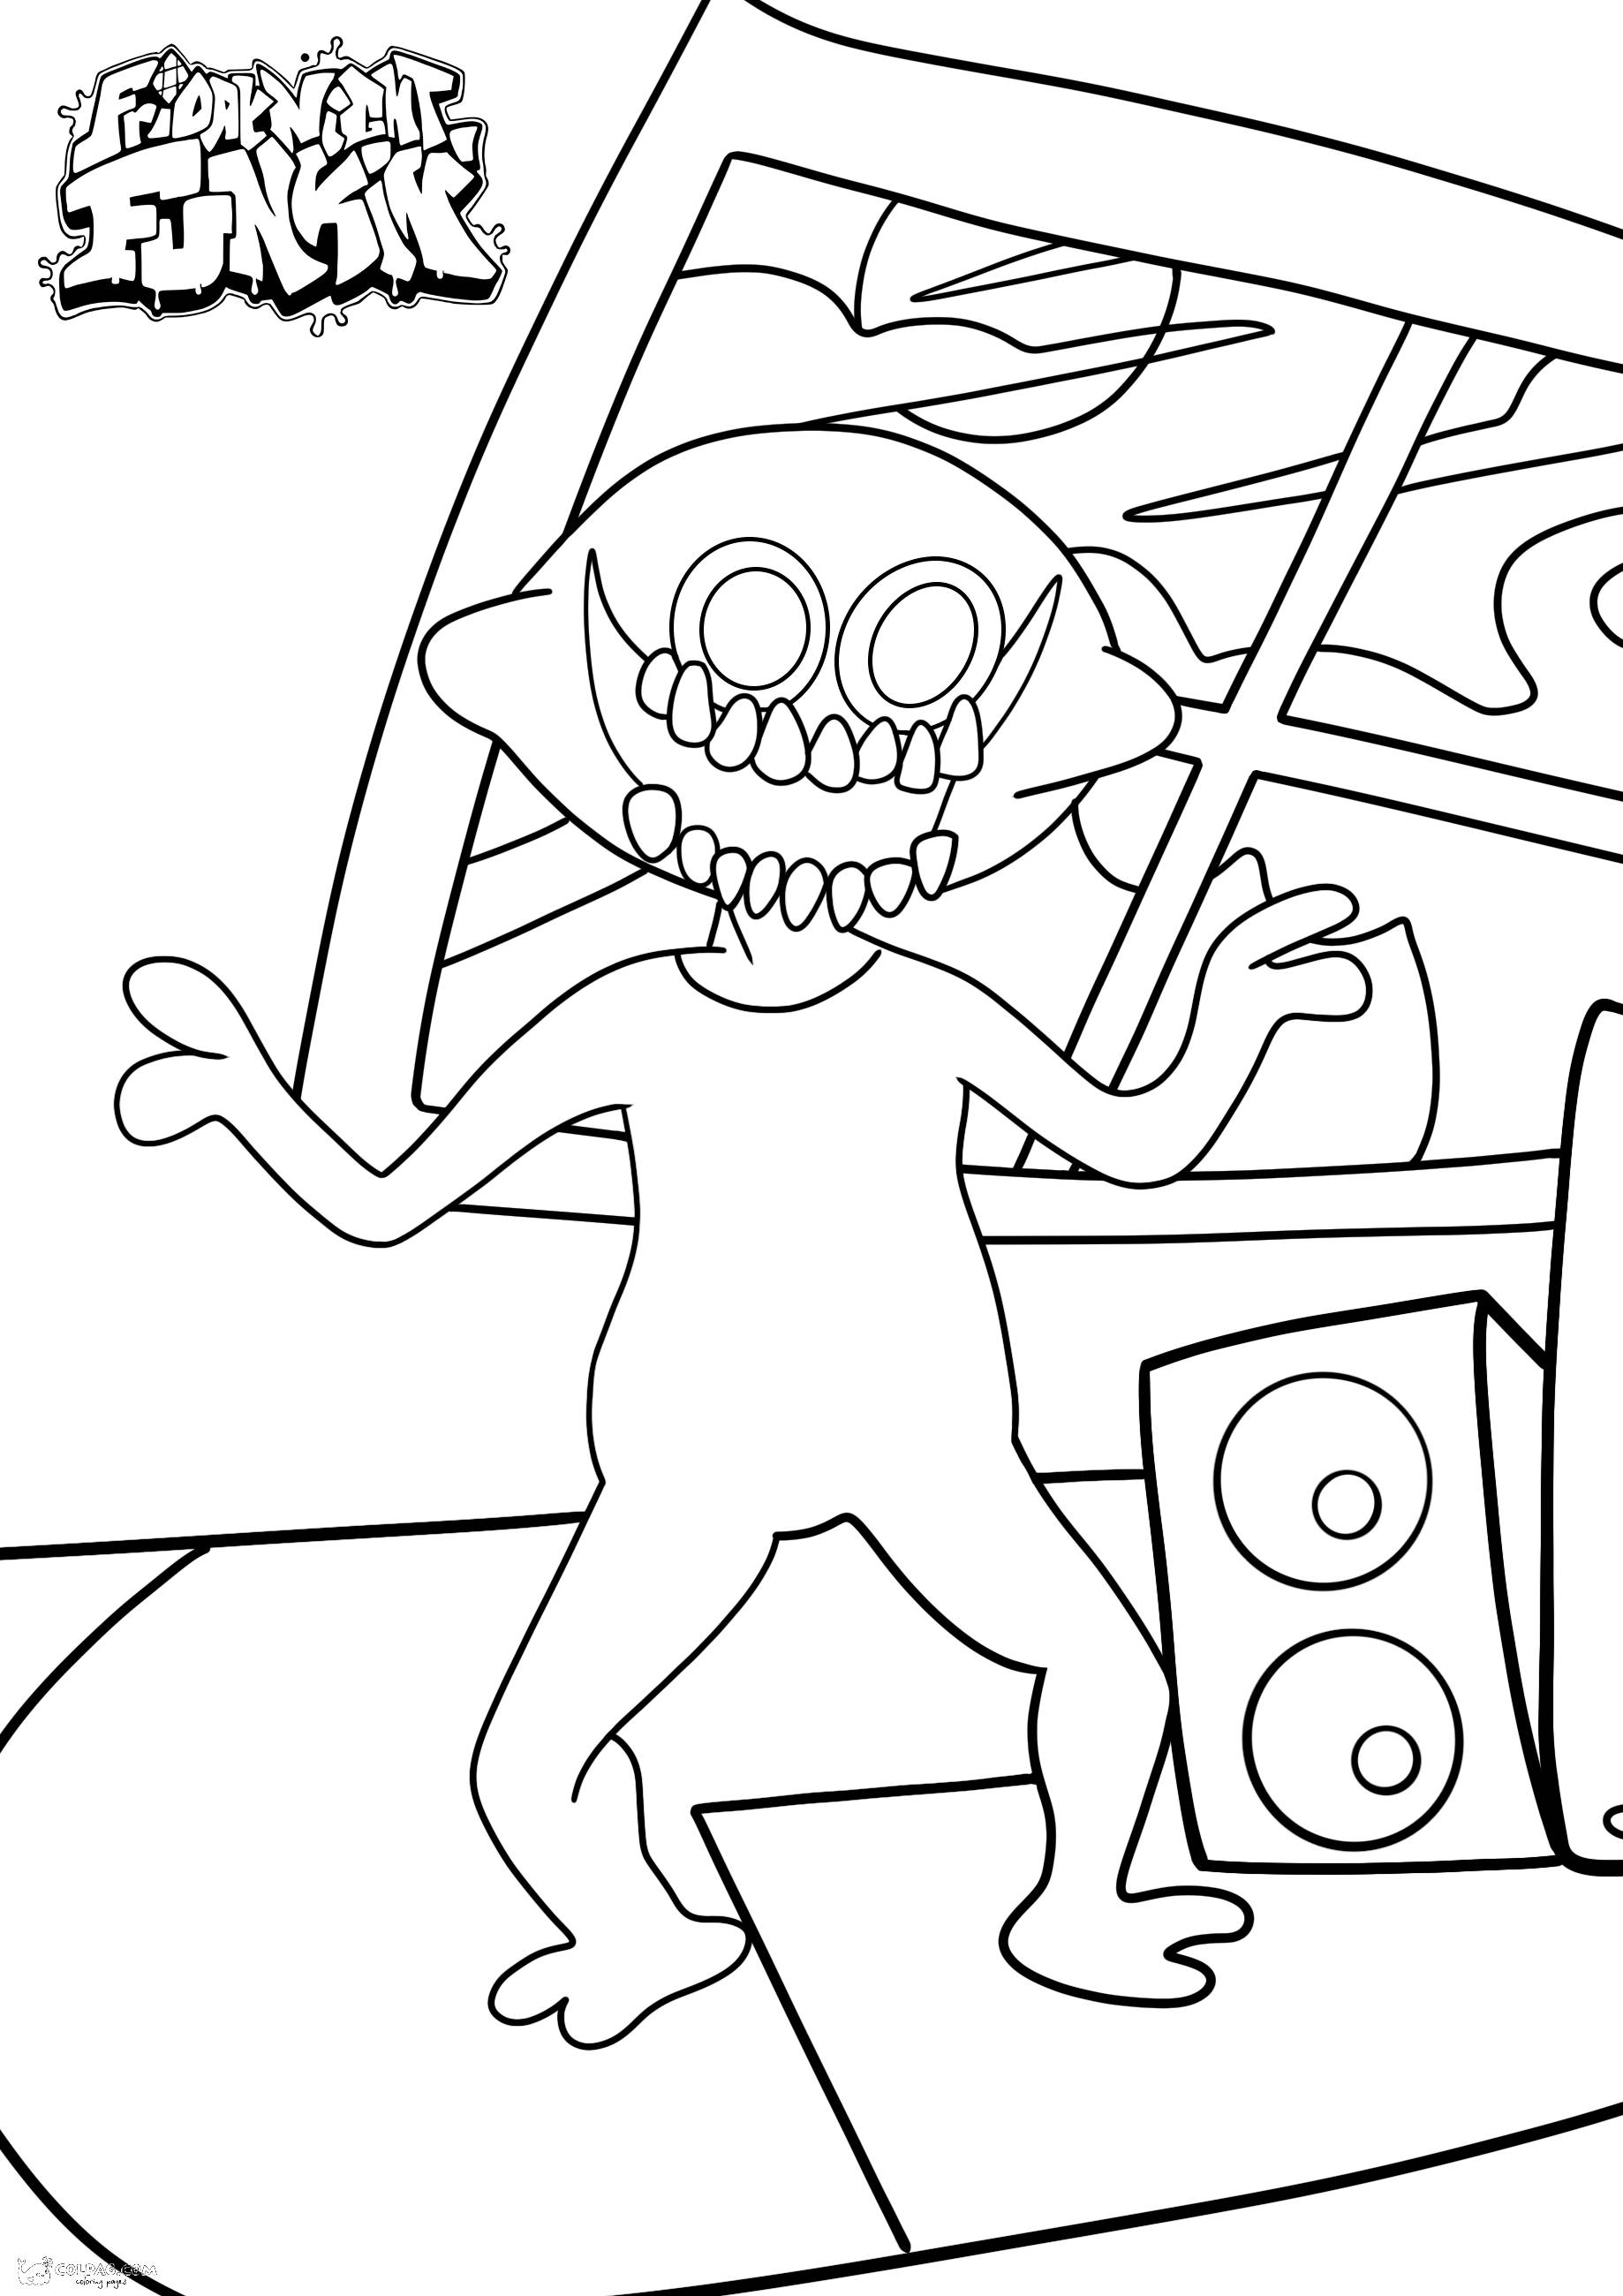 Coloriages de Friday Night Funkin'